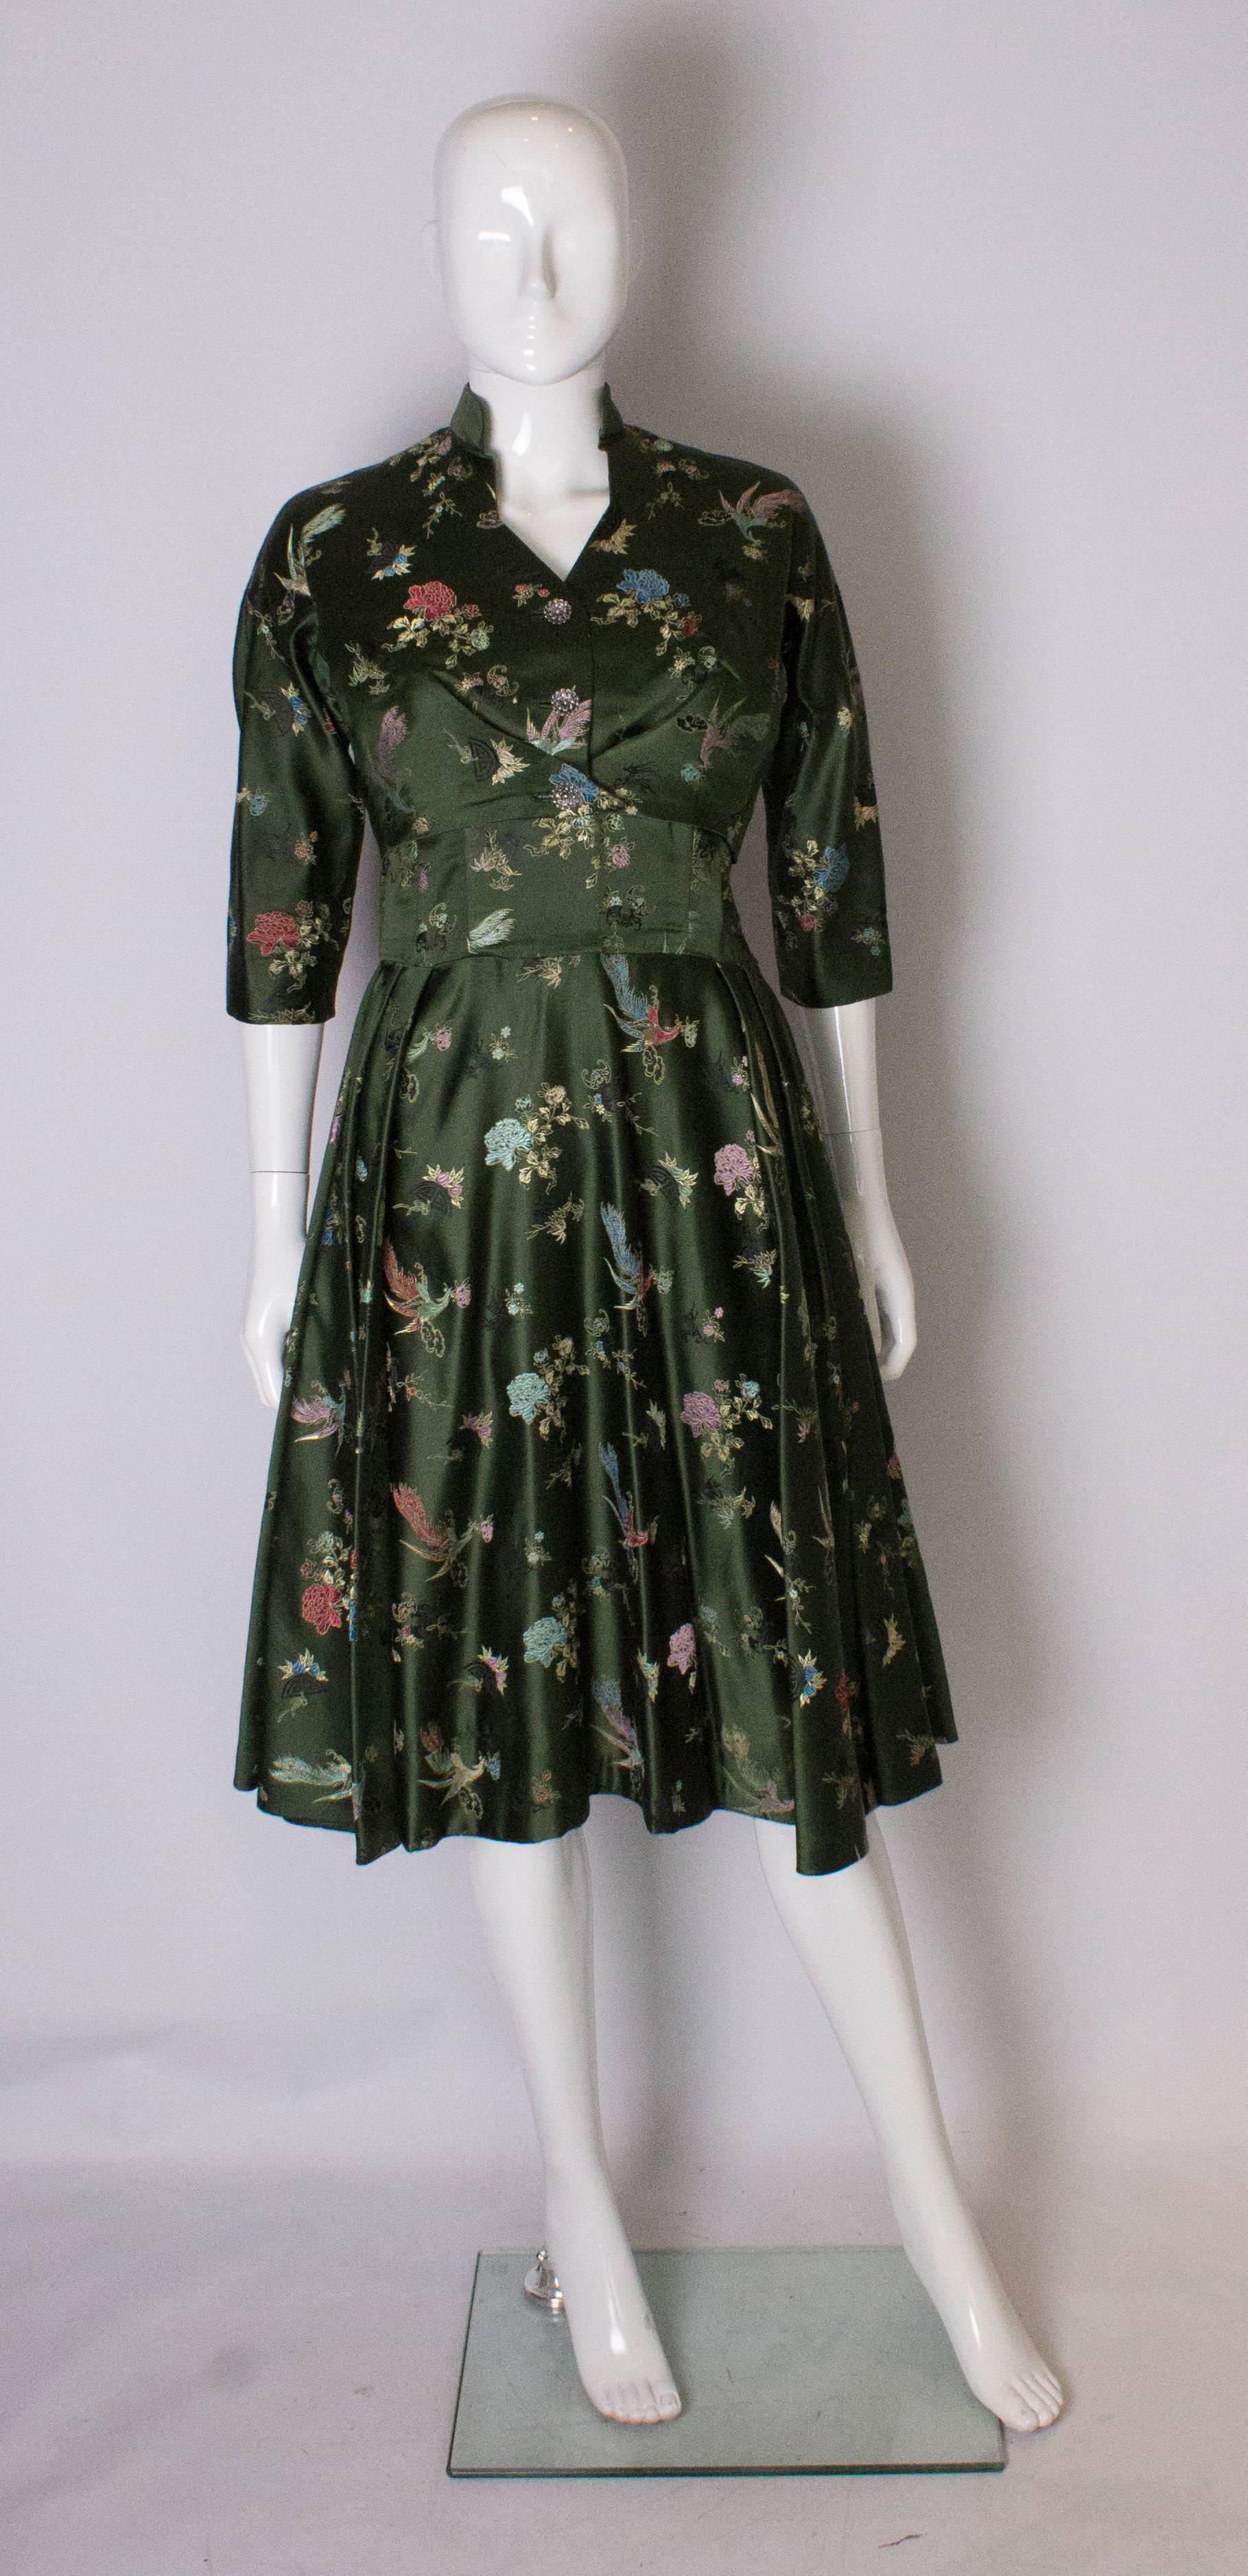 A pretty  vintage green cocktail dress and matching bolero jacket.  The dress has a boned bodice, with a flared skirt and side zip. The jacket has a three button fastening. Both the dress and jacket are fully lined.  Measurements: Dress, bust 36'',